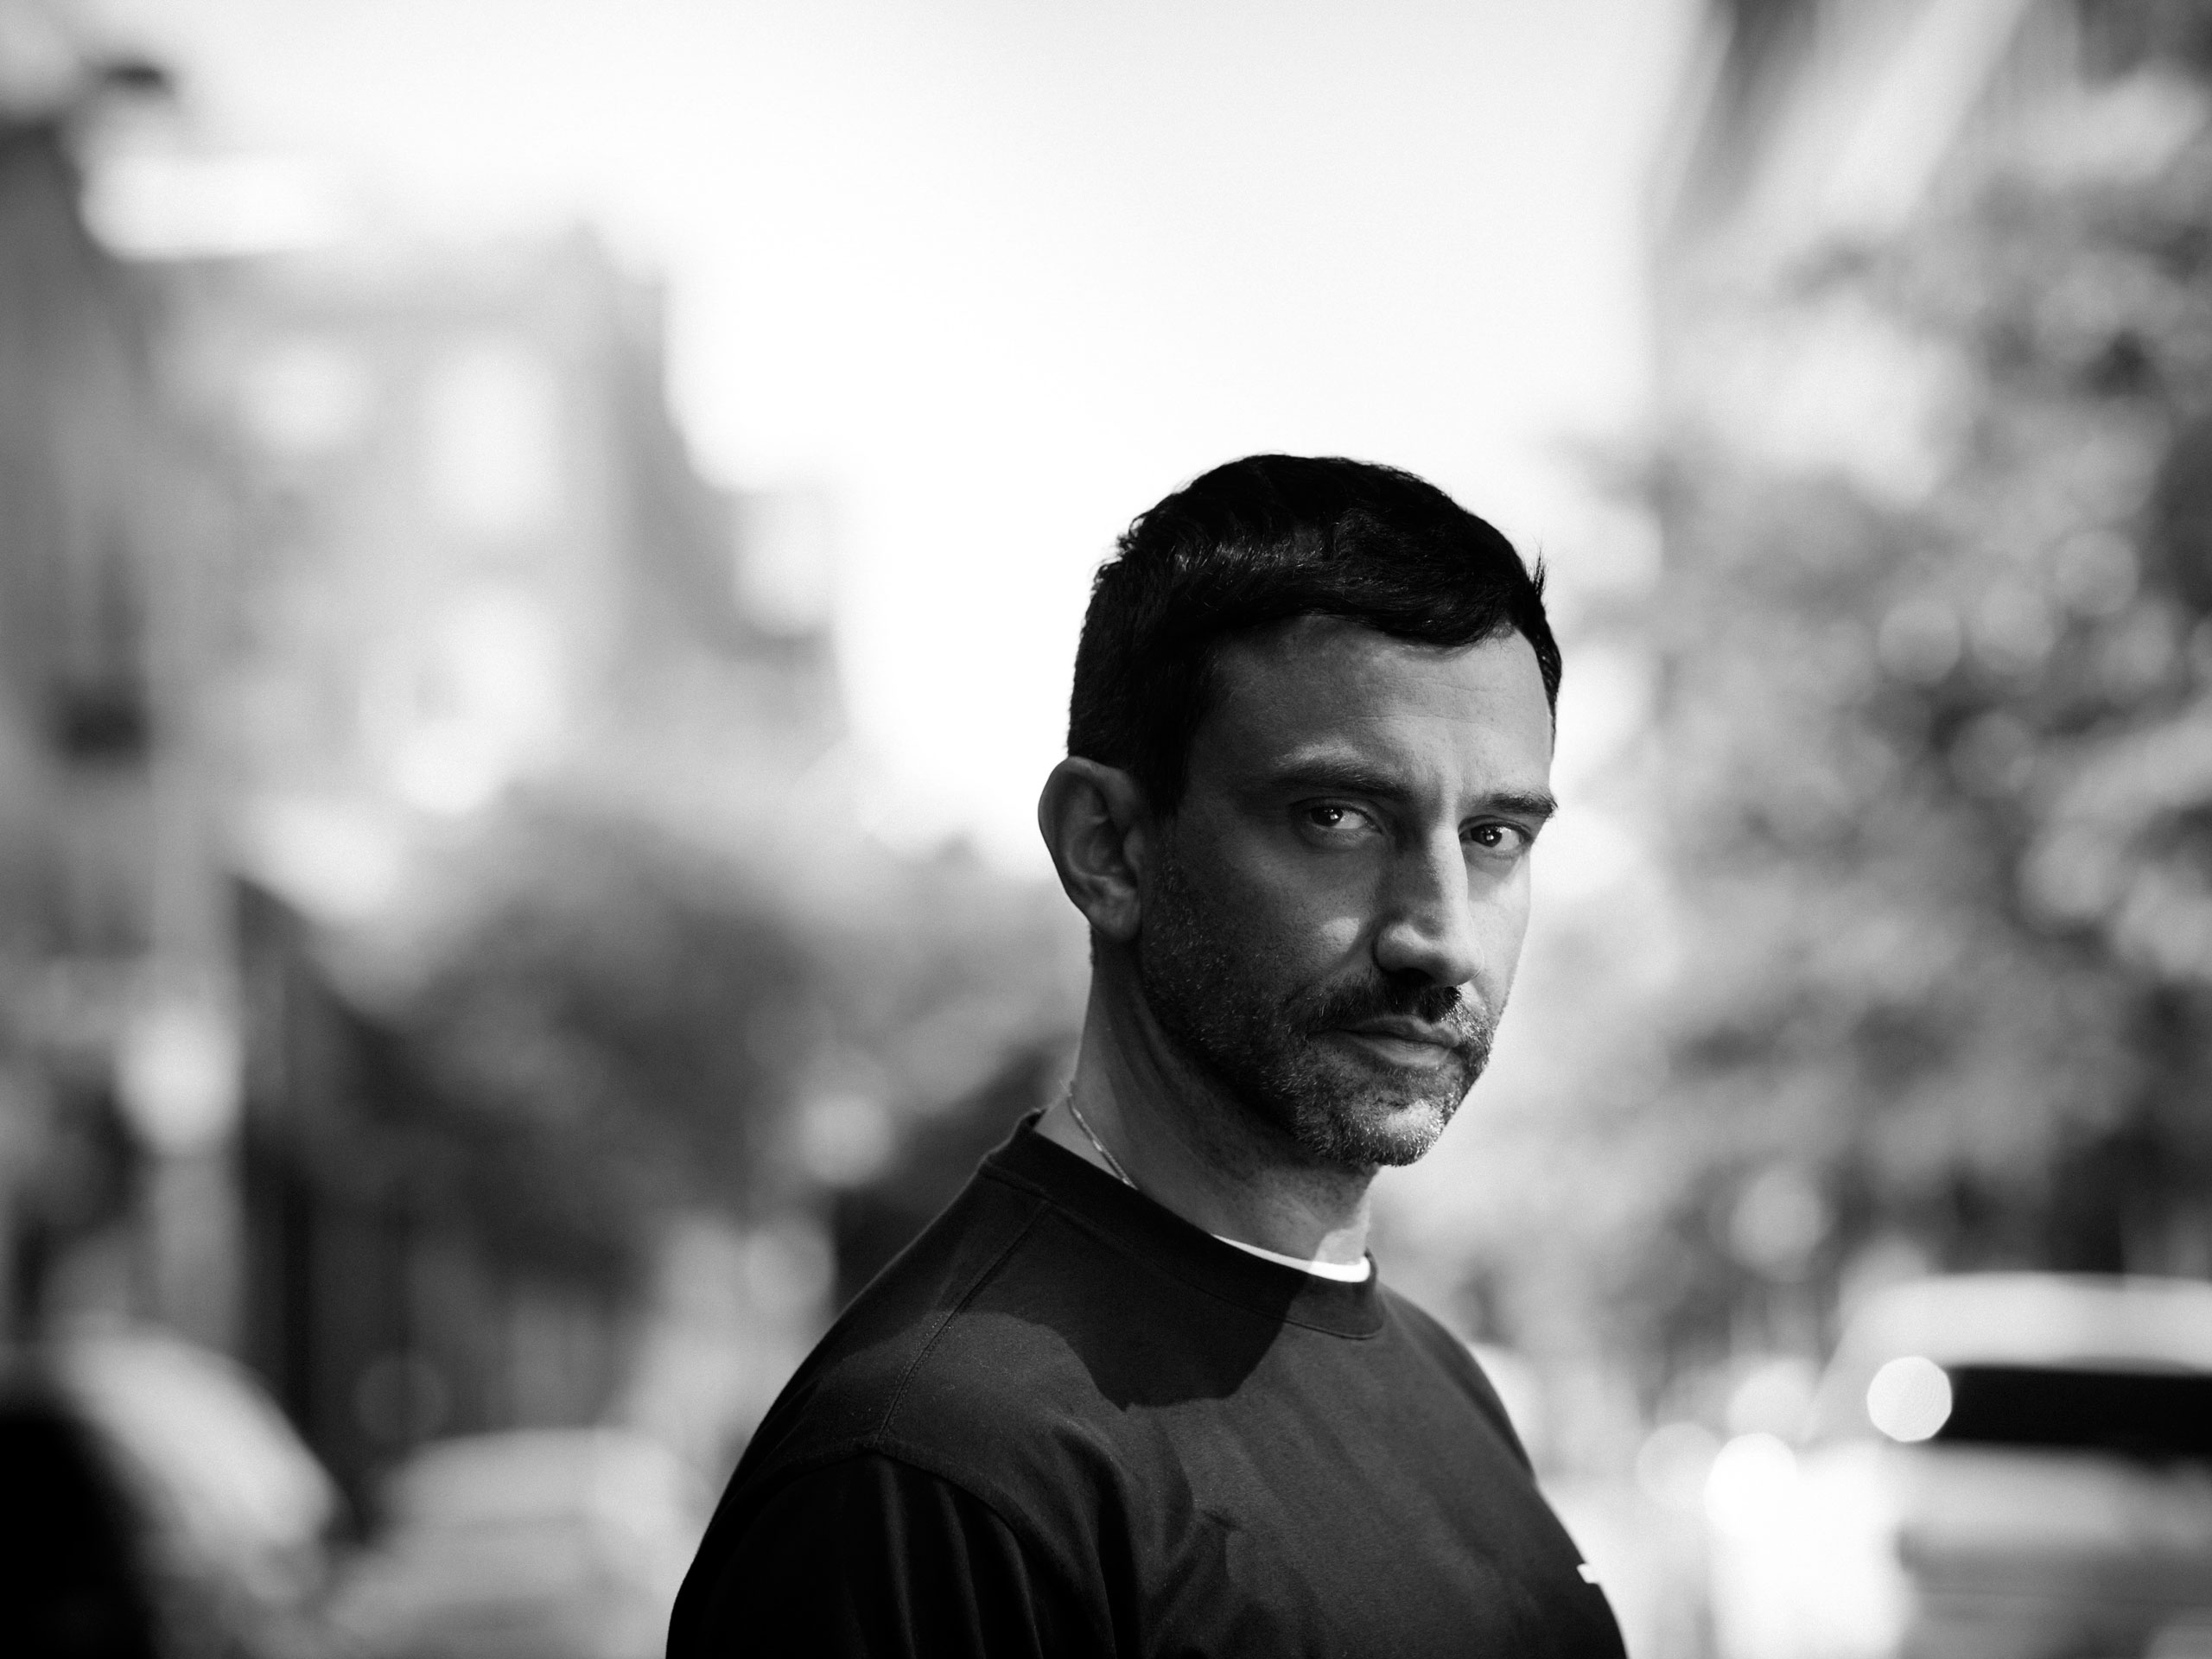 Riccardo Tisci, the Givenchy creative director, in New York, Sept. 14, 2015.